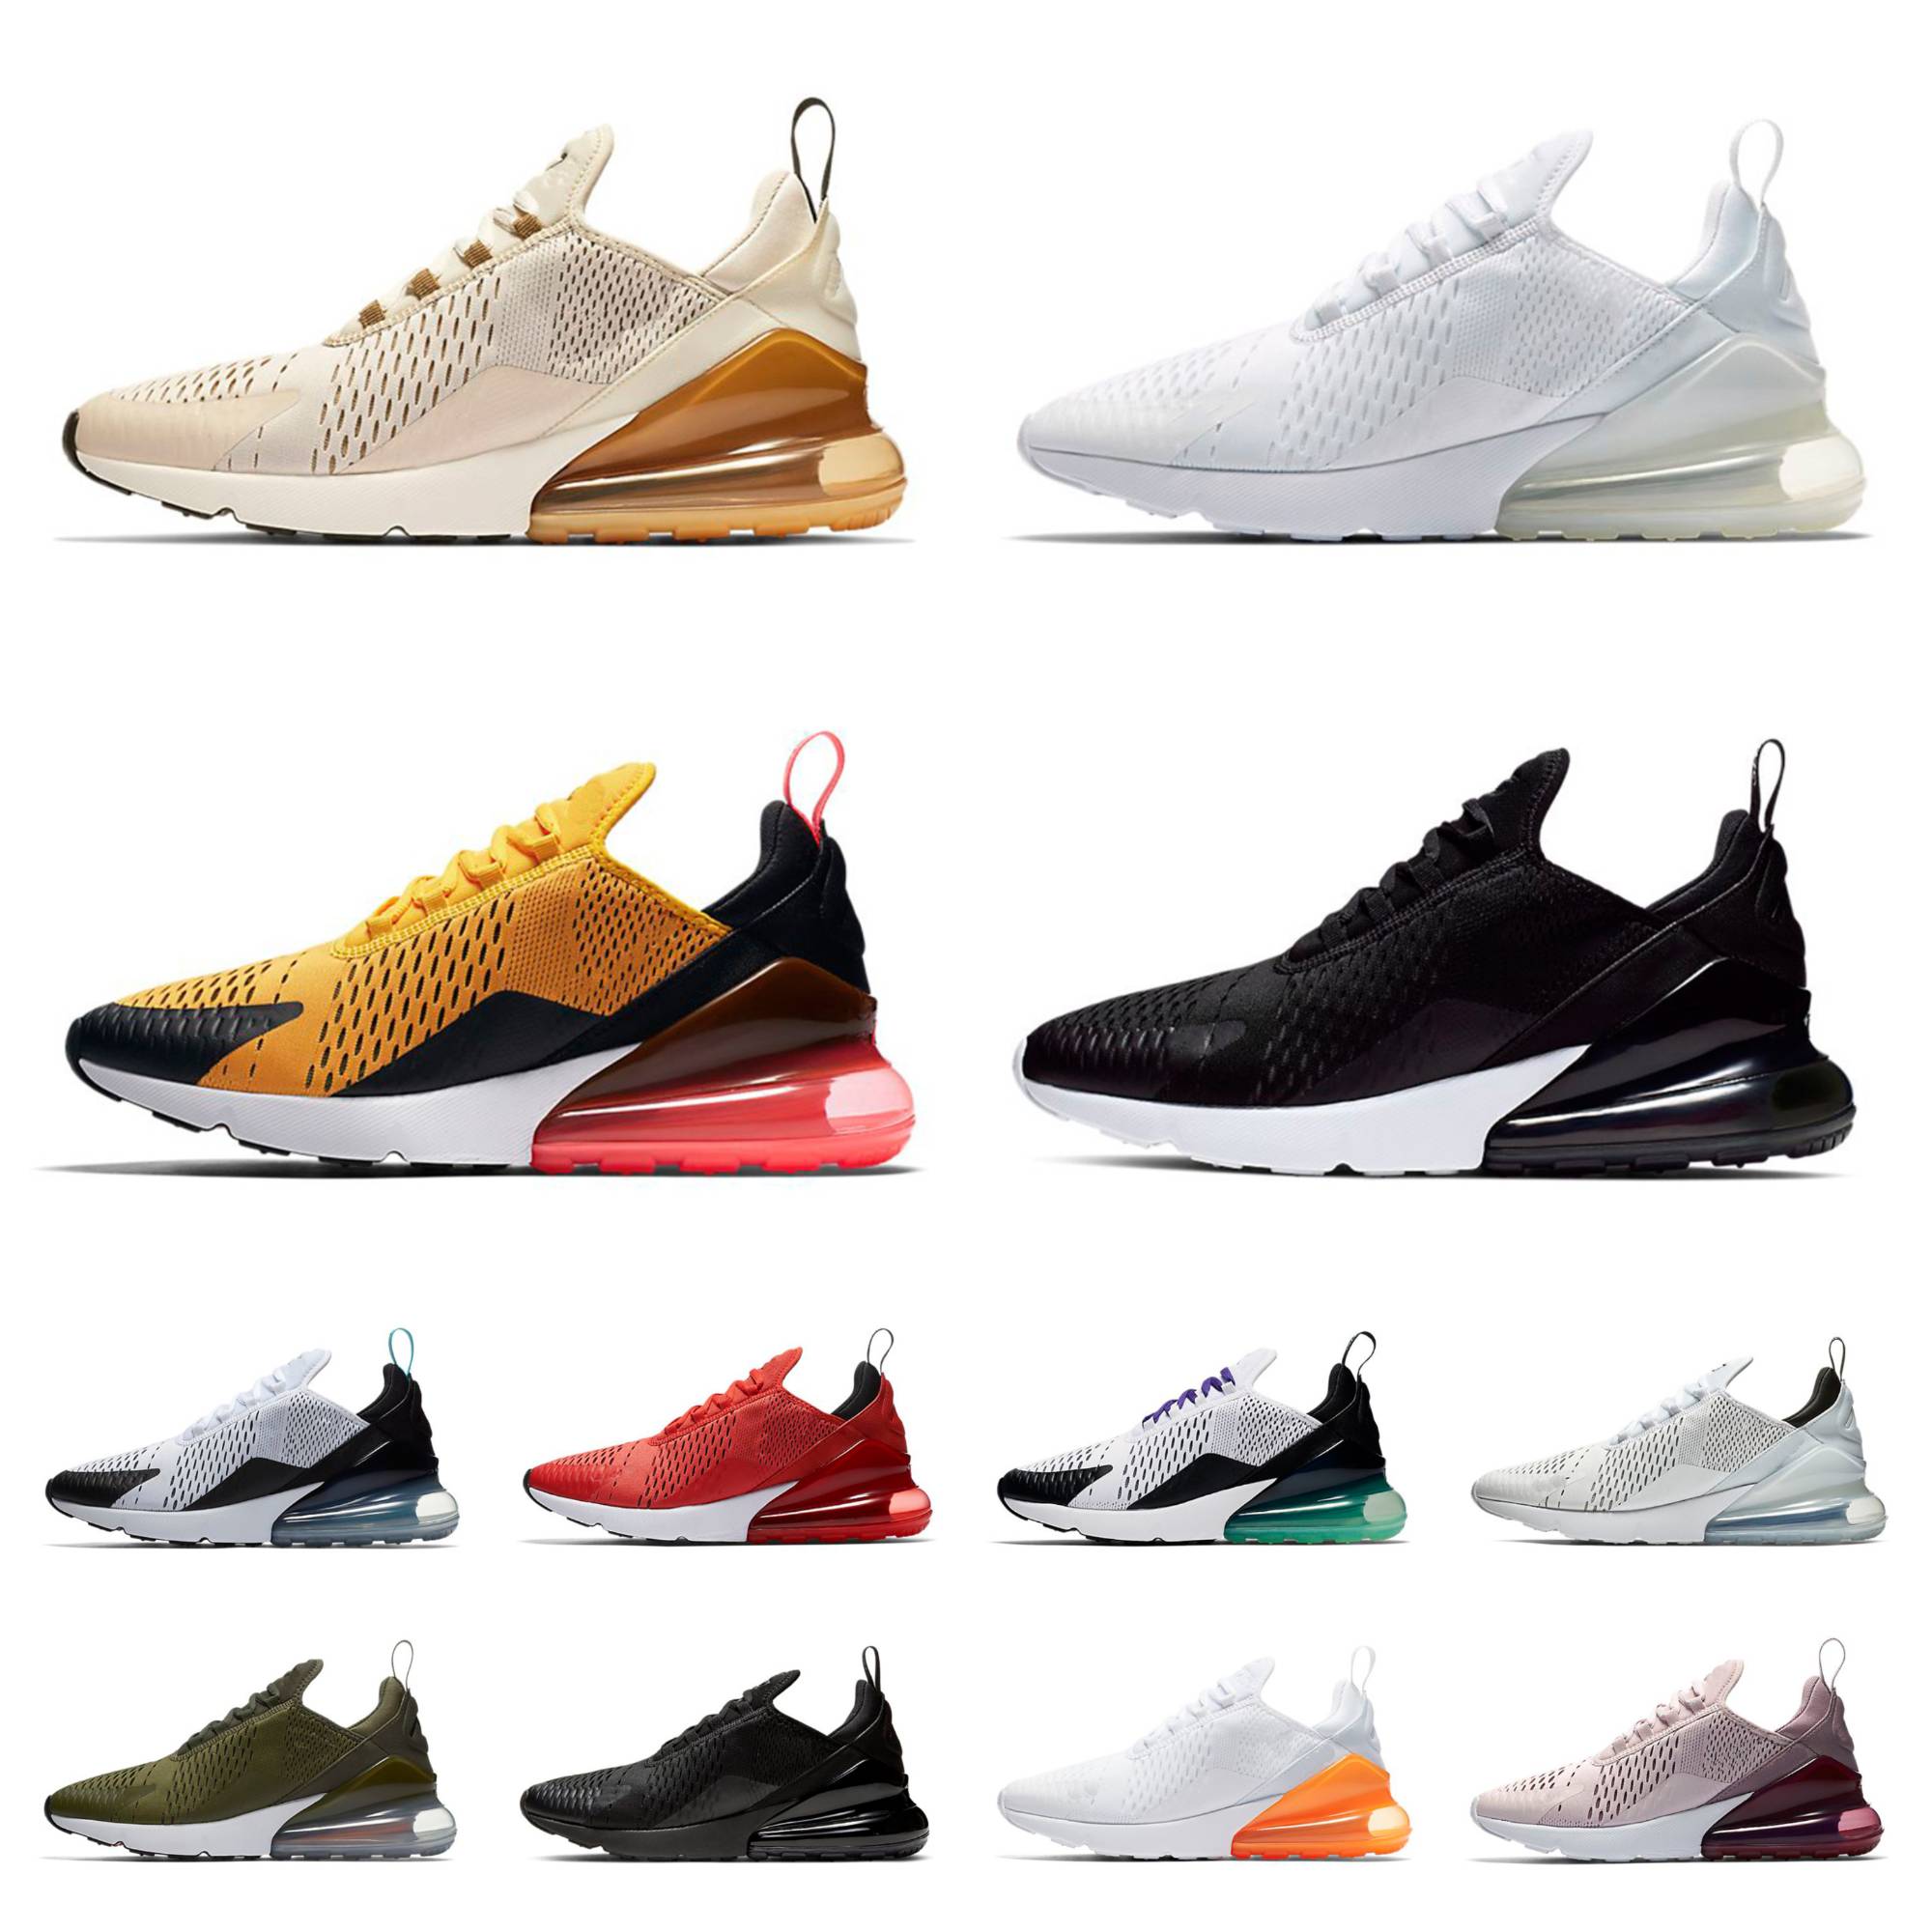 

Designer Max 270 Casual Shoes Men Women 270s Air React Triple Black White Royal Bred Be True Metallic Gold Barely Rose Olive Dusty Cactus Midnight Navy Sports Sneakers, Shoes lace